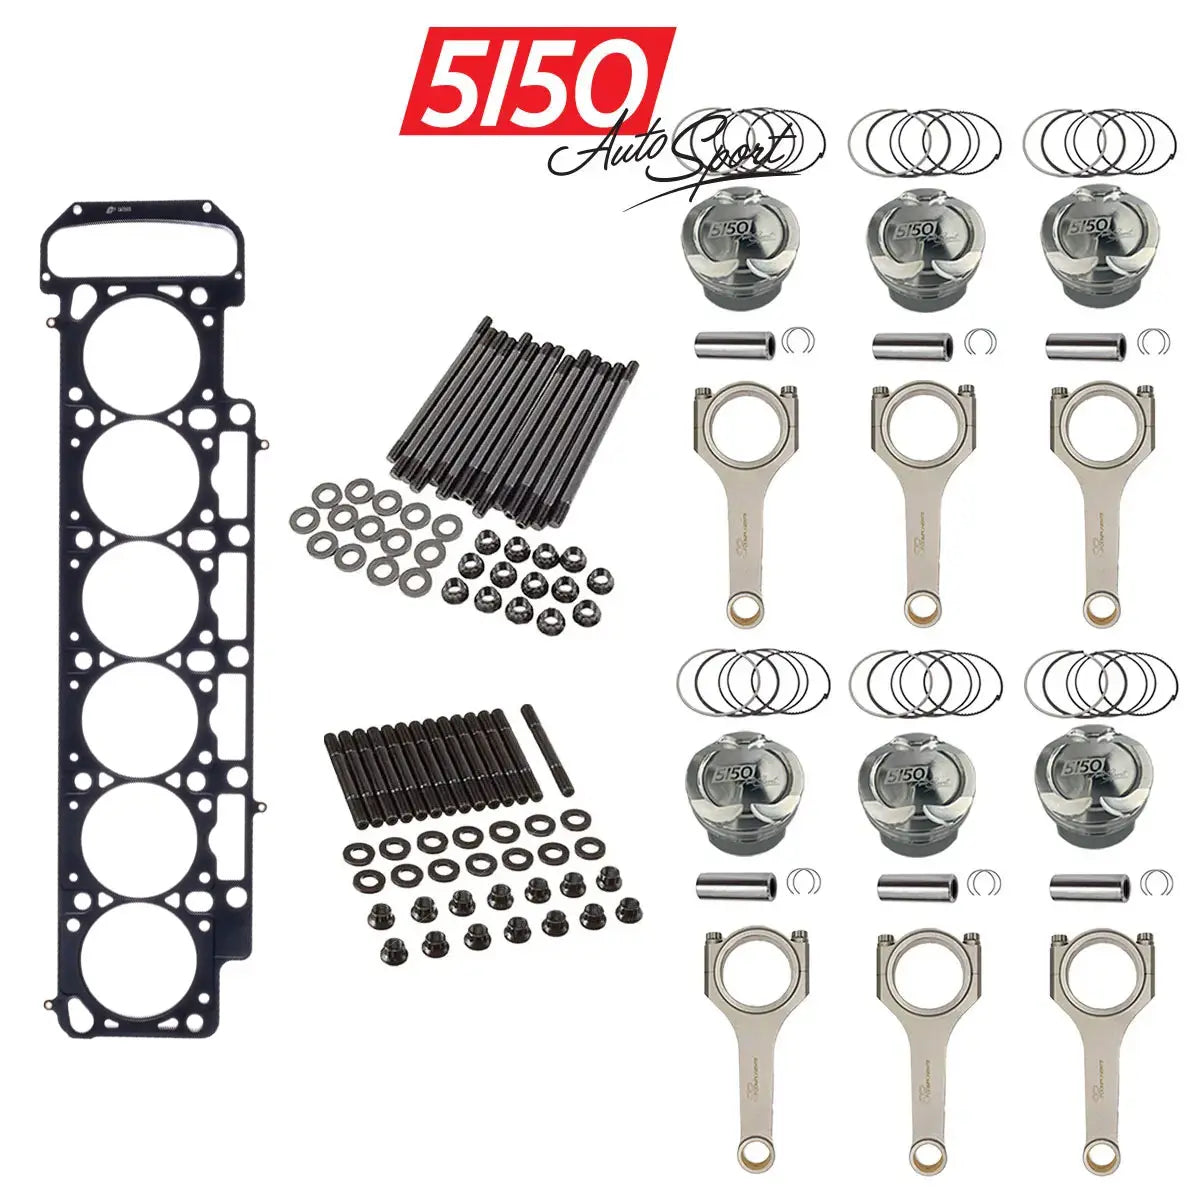 BMW S38 Engine Rebuild Kit with Forged Internals